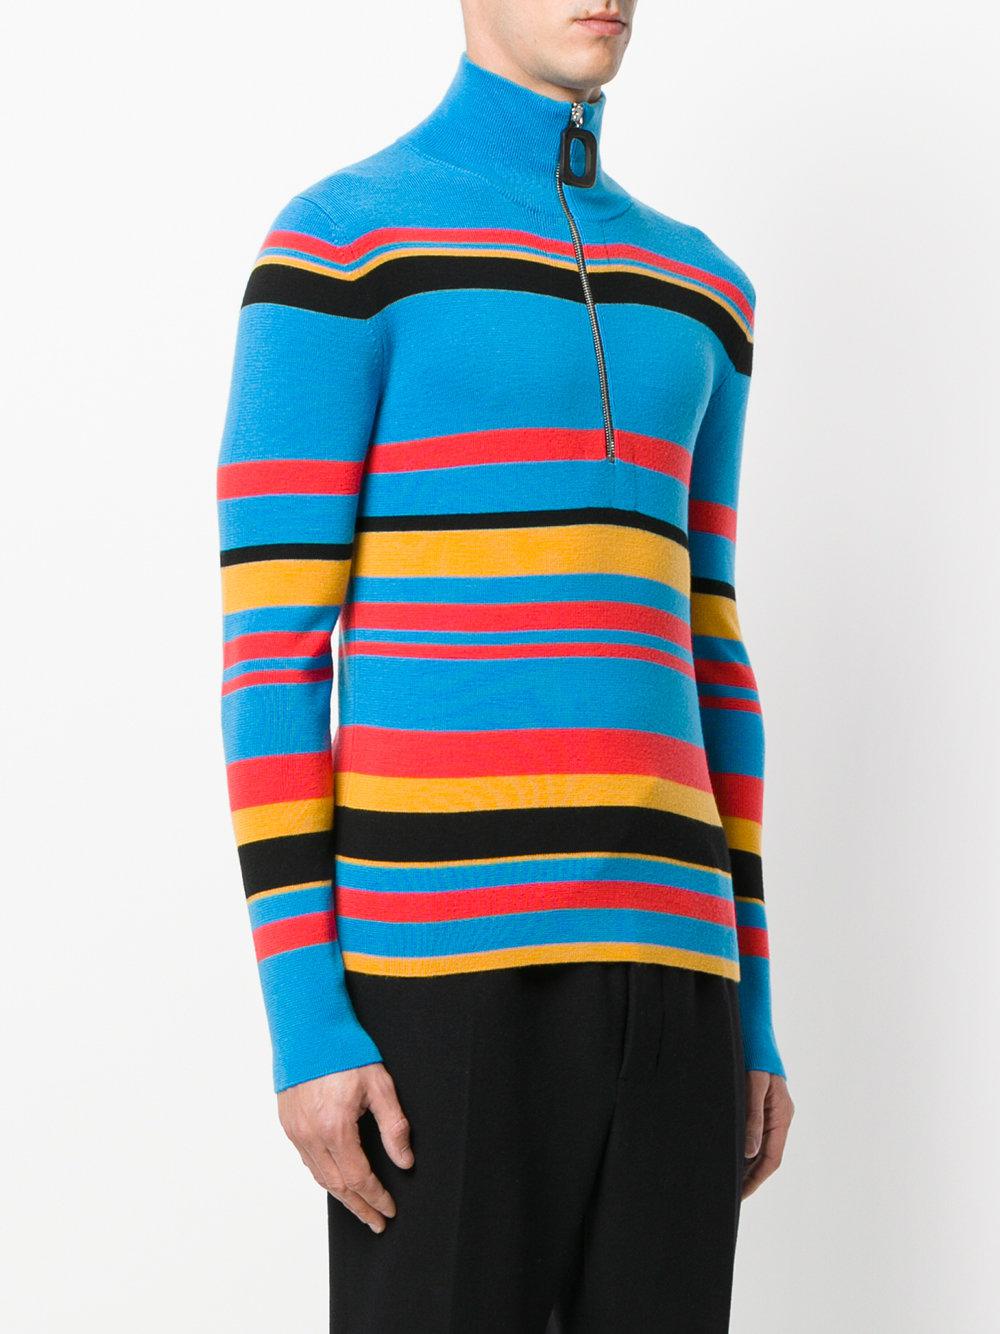 JW Anderson Synthetic Half Zip Sweater in Blue for Men - Lyst